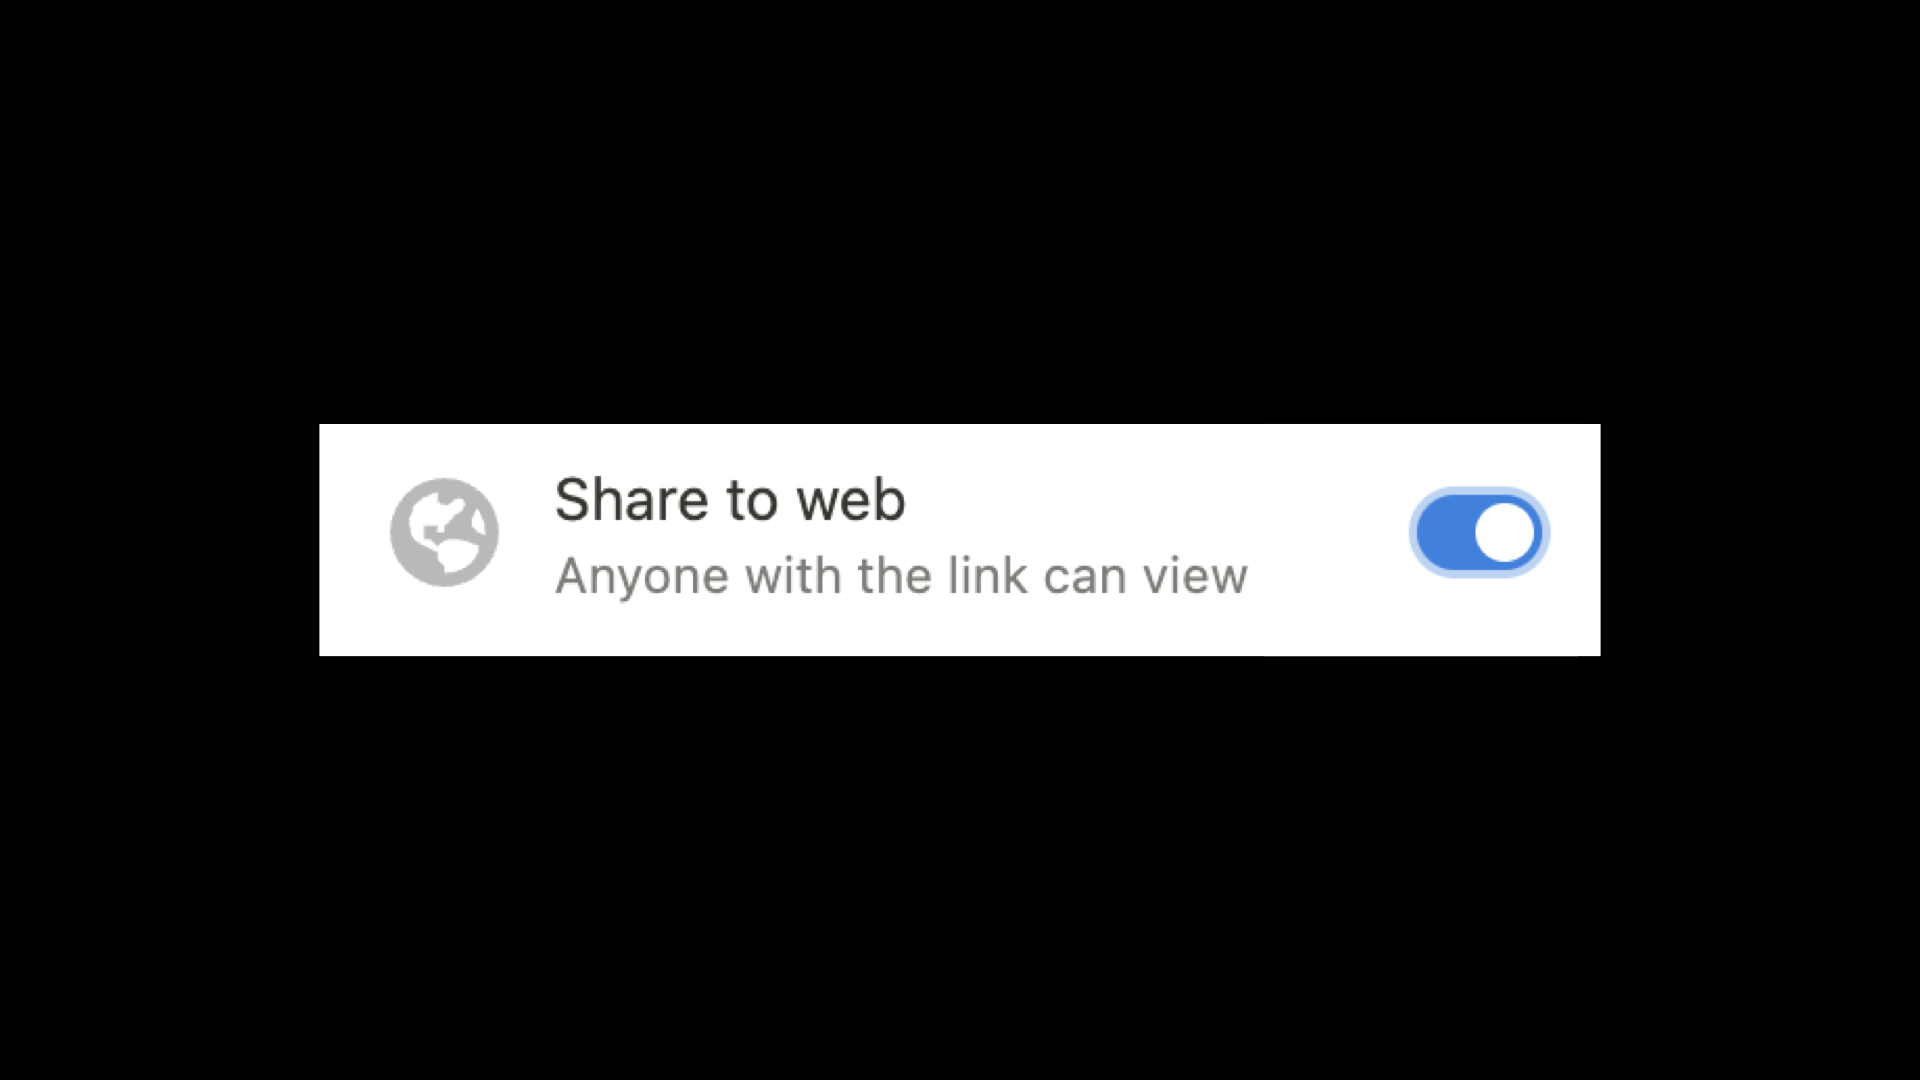 Notion’s “Share to web” UI.